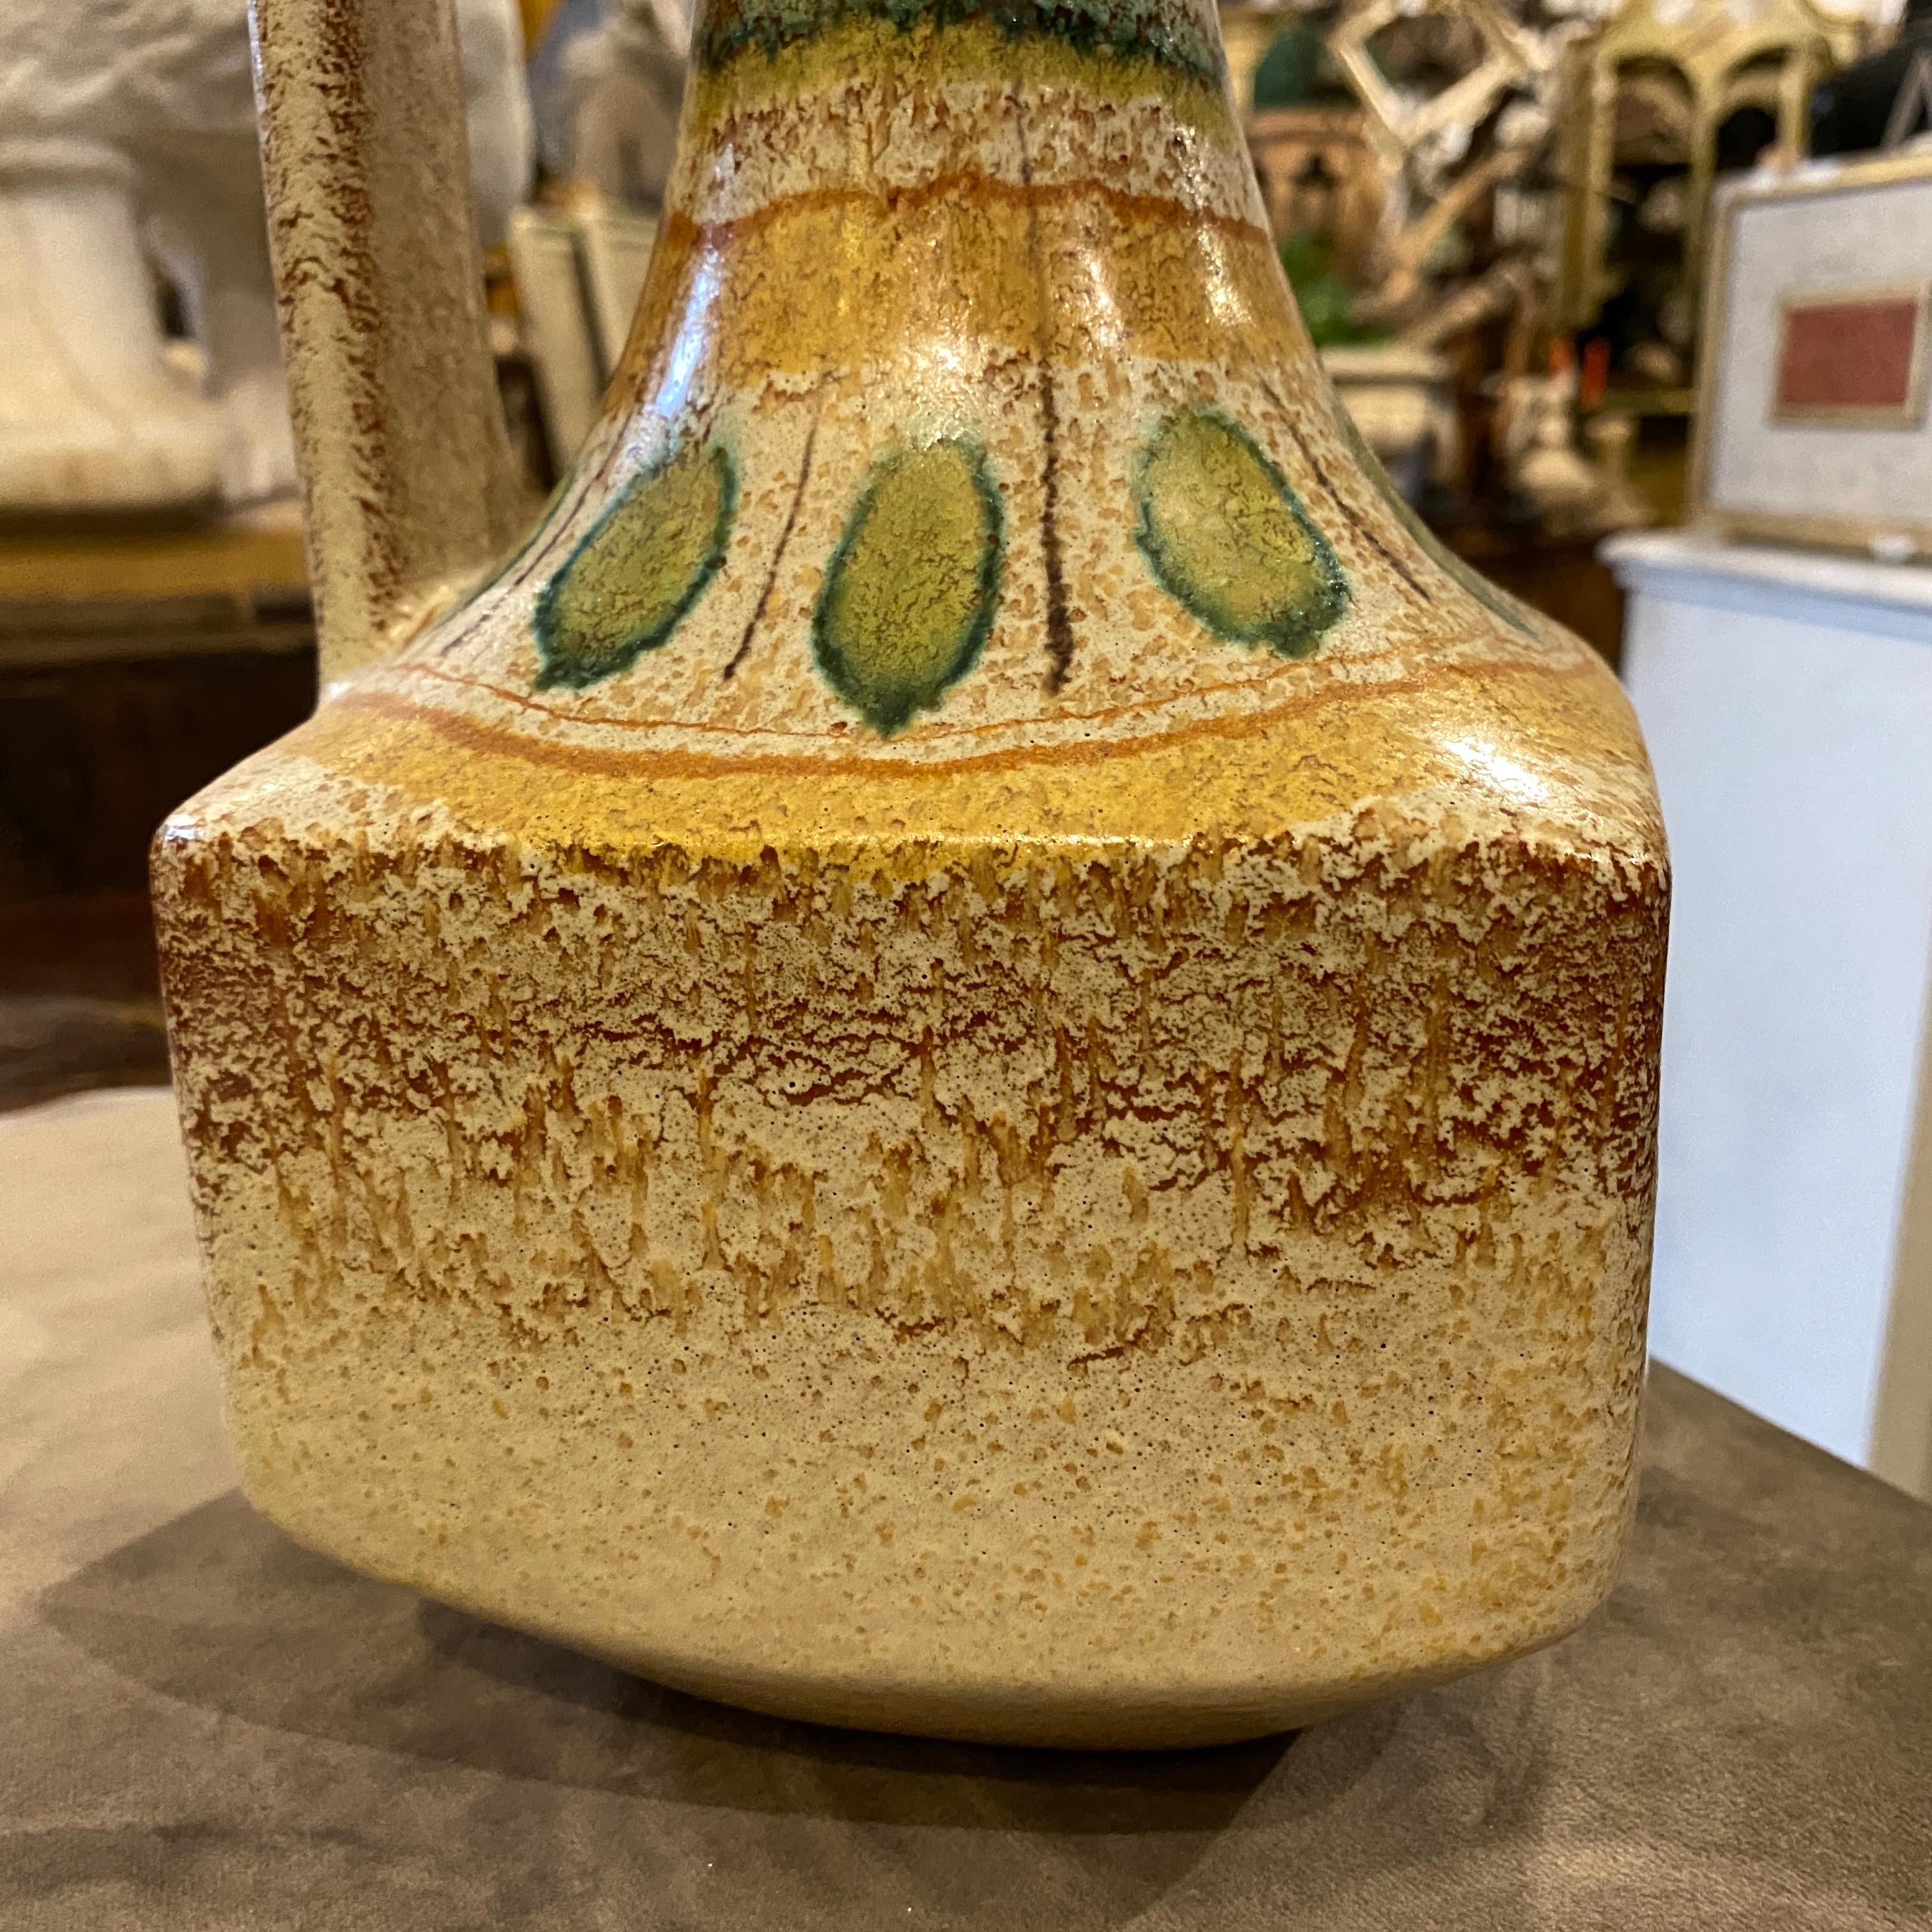 An hand-crafted ceramicjug vase made in Italy in the Seventies by Bertoncello in perfect conditions. A jug by Bertoncello is a highly sought-after collectible piece that embodies the design aesthetic of the era. Bertoncello was an esteemed Italian